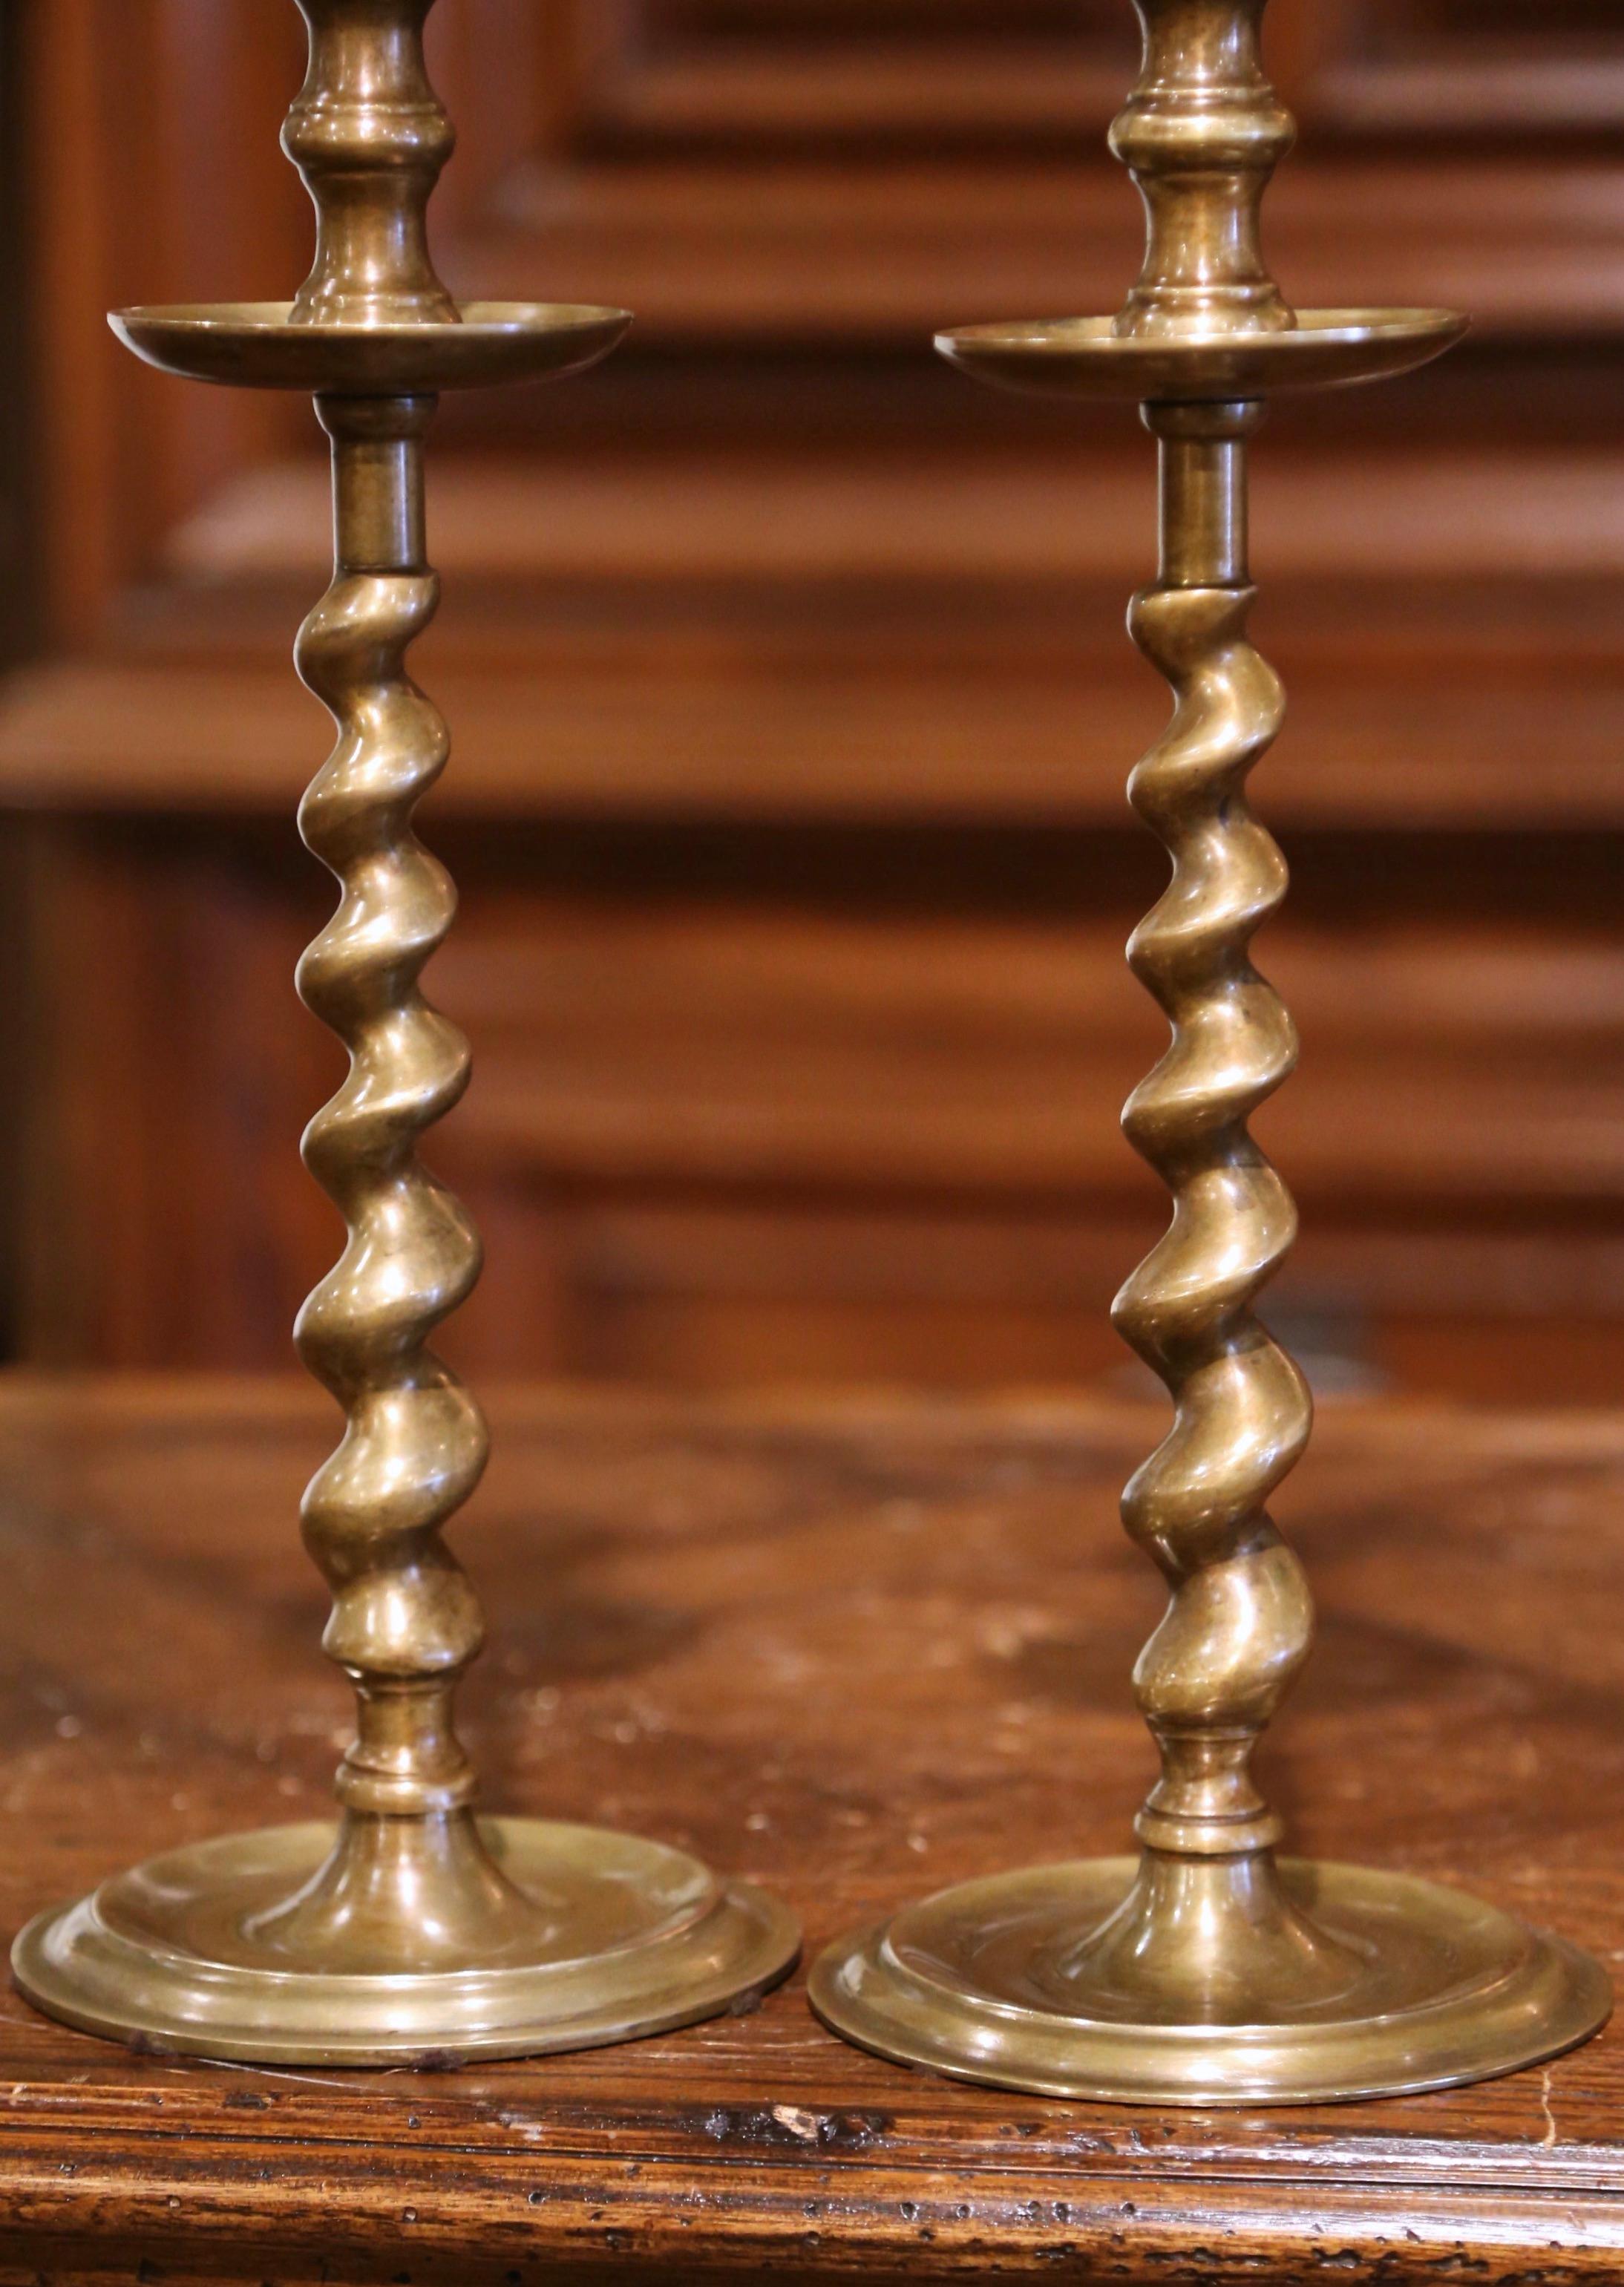 Decorate a dining table or console with this elegant pair of candlesticks. Crafted in England circa 1980, Each candle holder stands on a round vase over a barley twist stem. The lights are in excellent condition and adorn a rich patinated brass